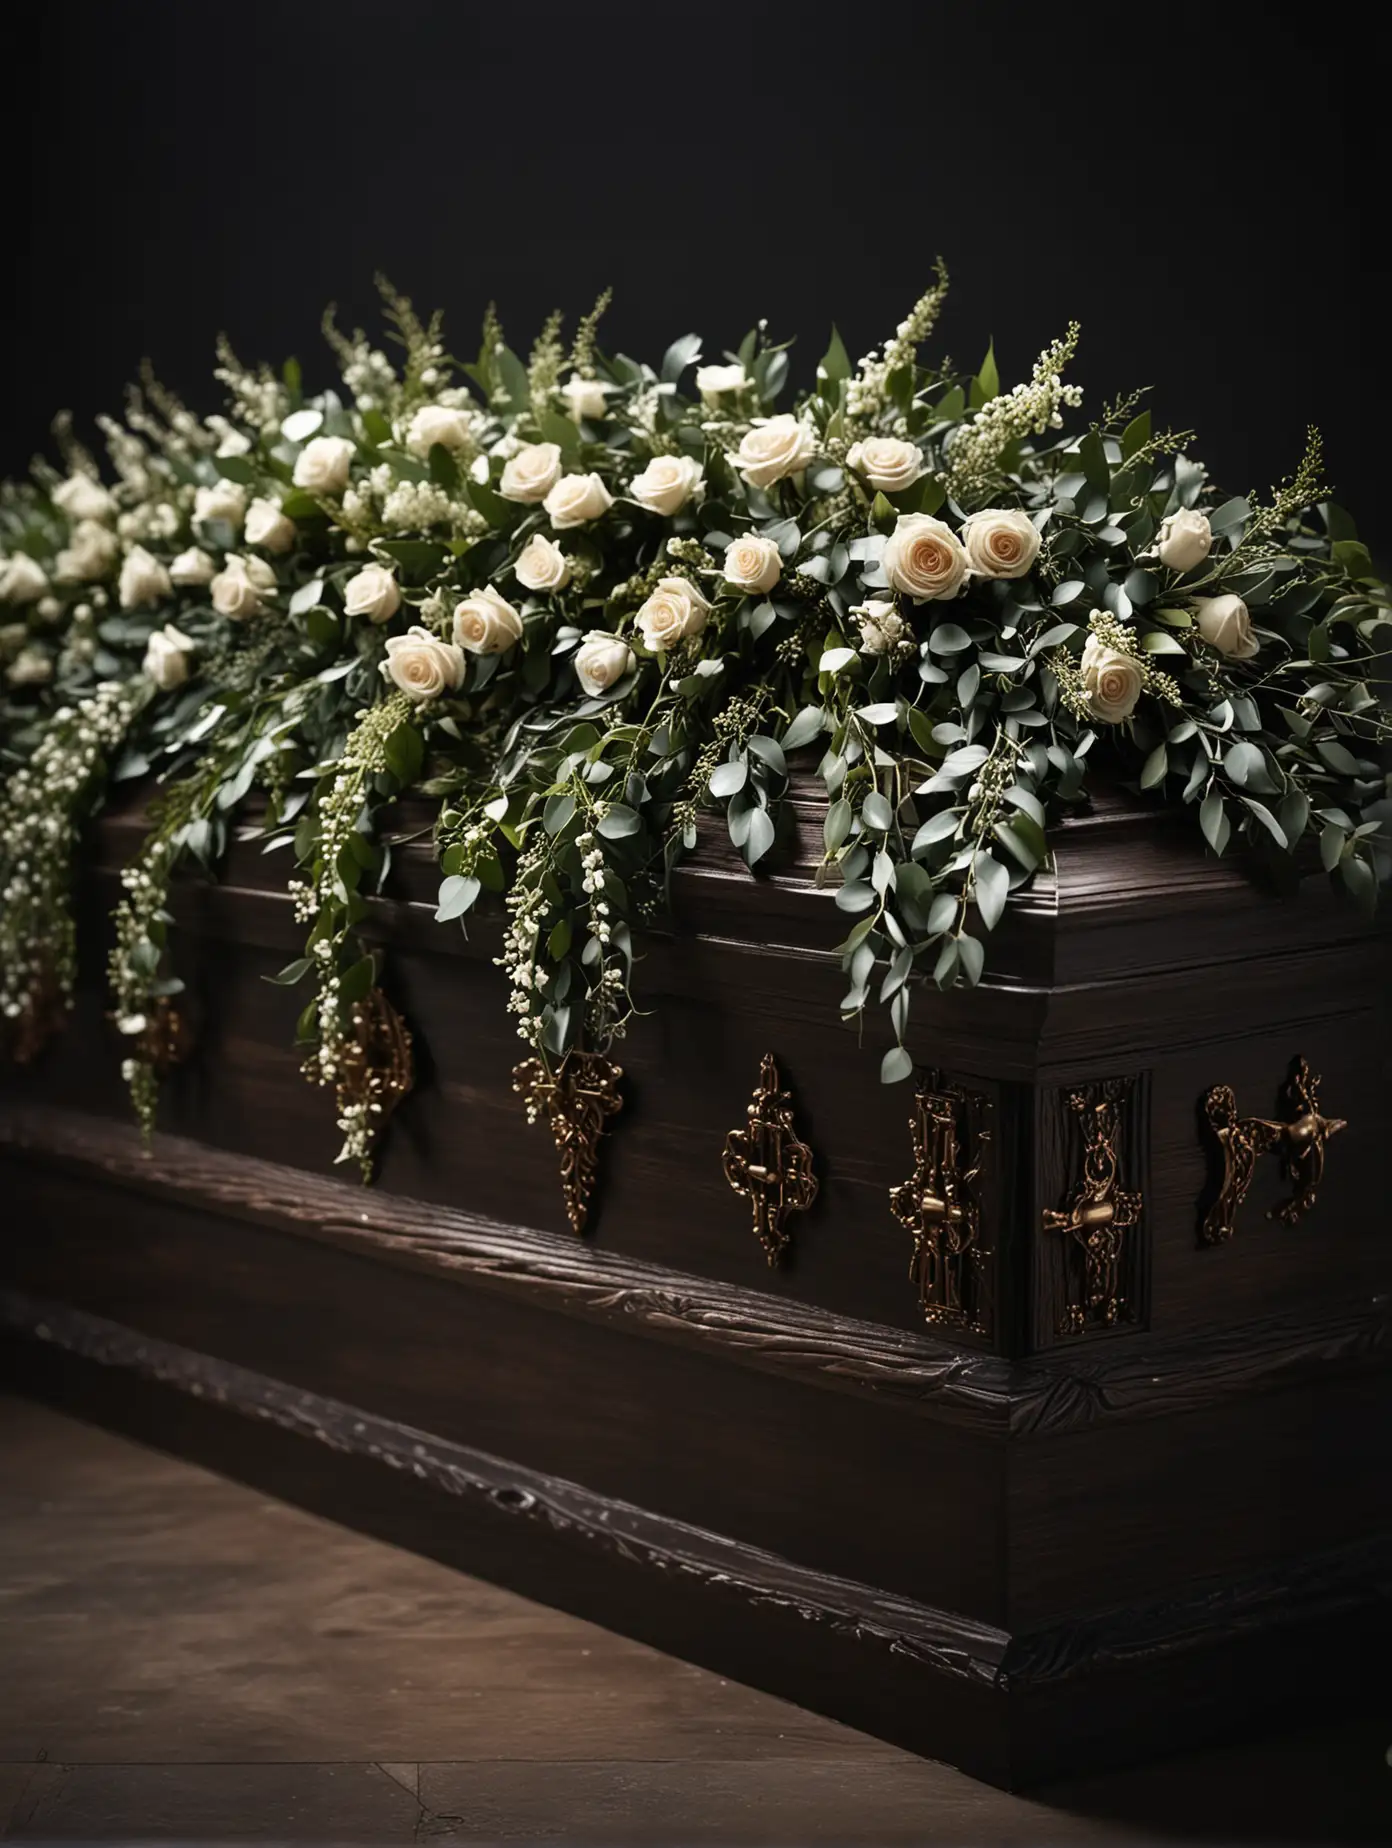 single dark bokeh light source, fragment of modern elegant coffin standing on a catafalque, garlands lying on the coffin, coffin seen sideways at a sharp angle in perspective, solid blurred dark background